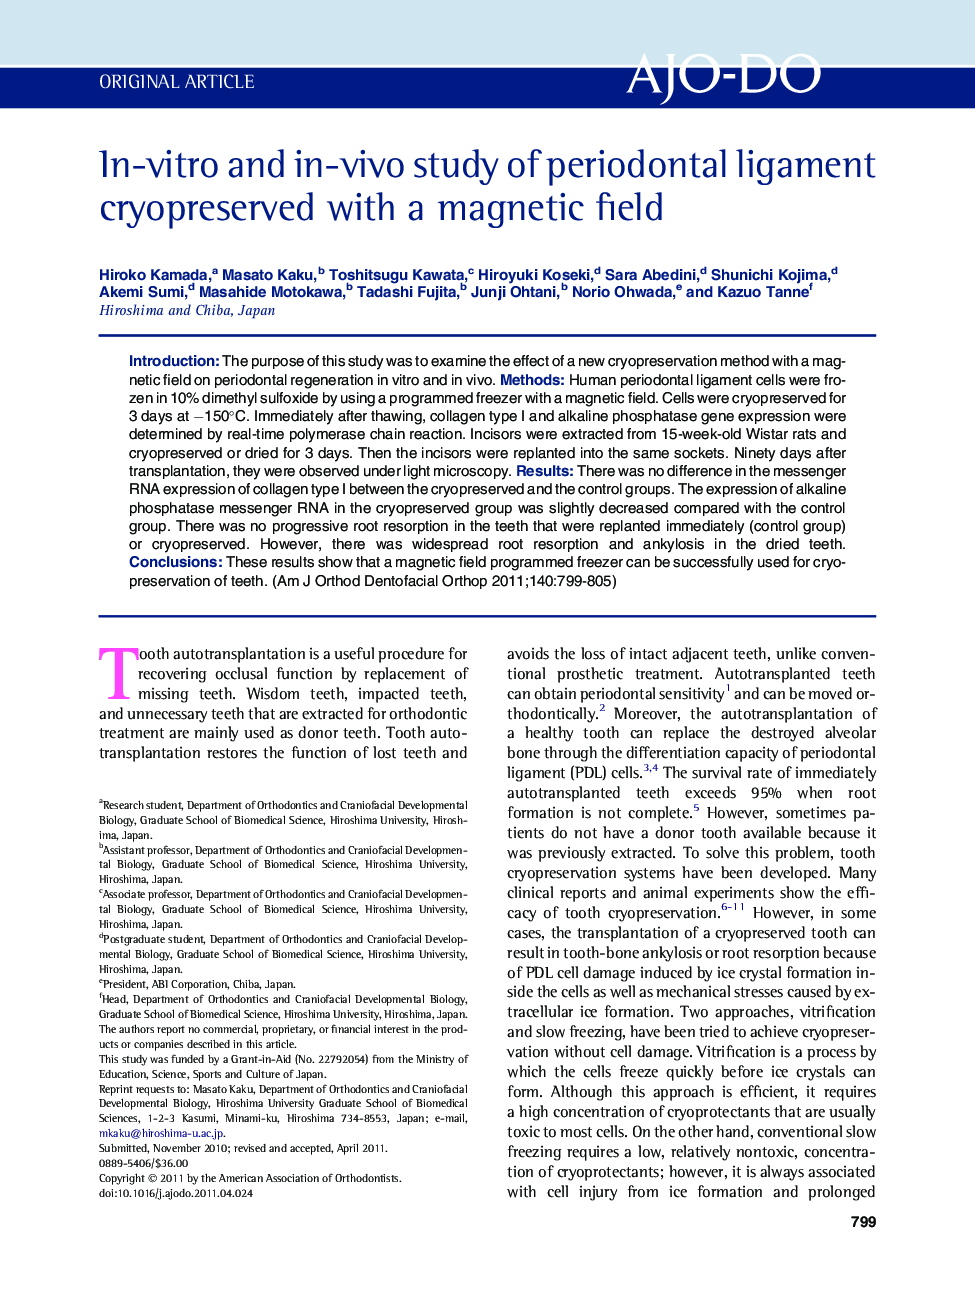 In-vitro and in-vivo study of periodontal ligament cryopreserved with a magnetic field